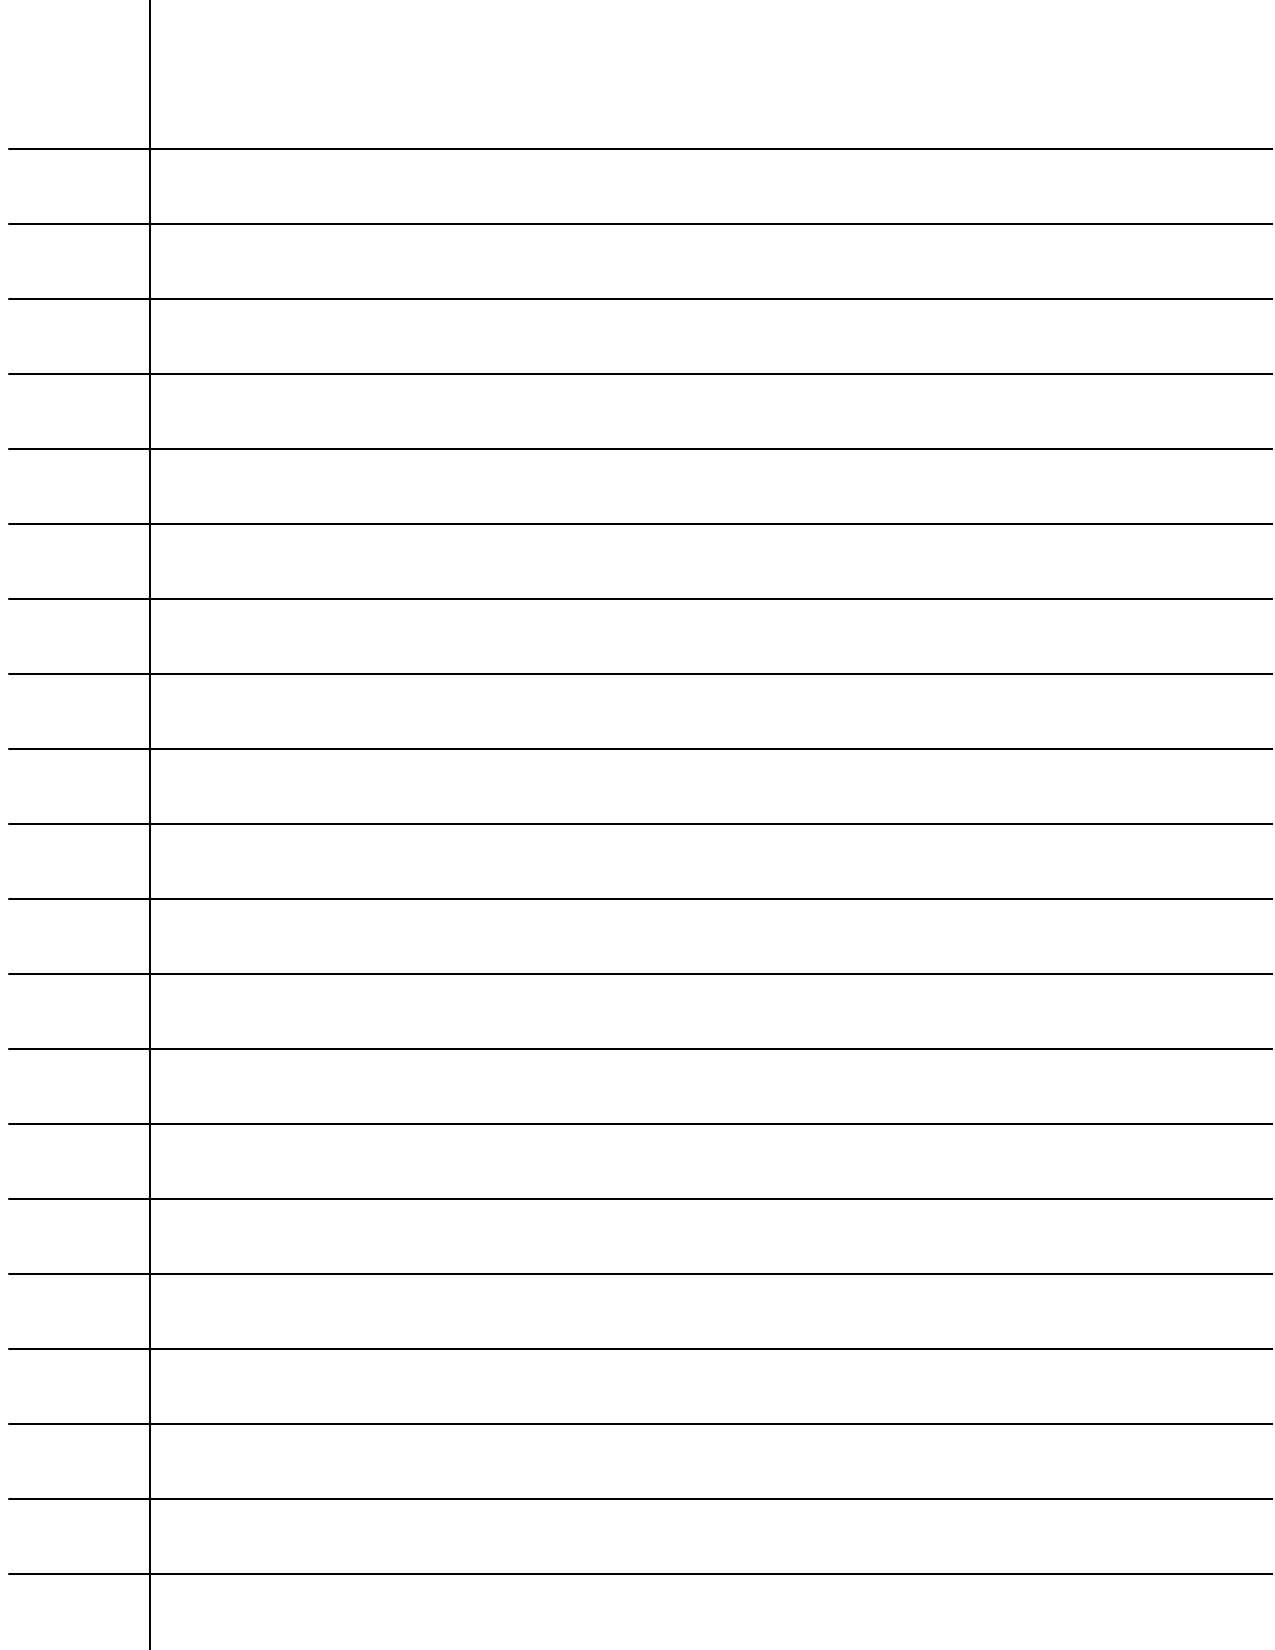 Ruled Paper Word Template – Atlantaauctionco For Ruled Paper Word Template